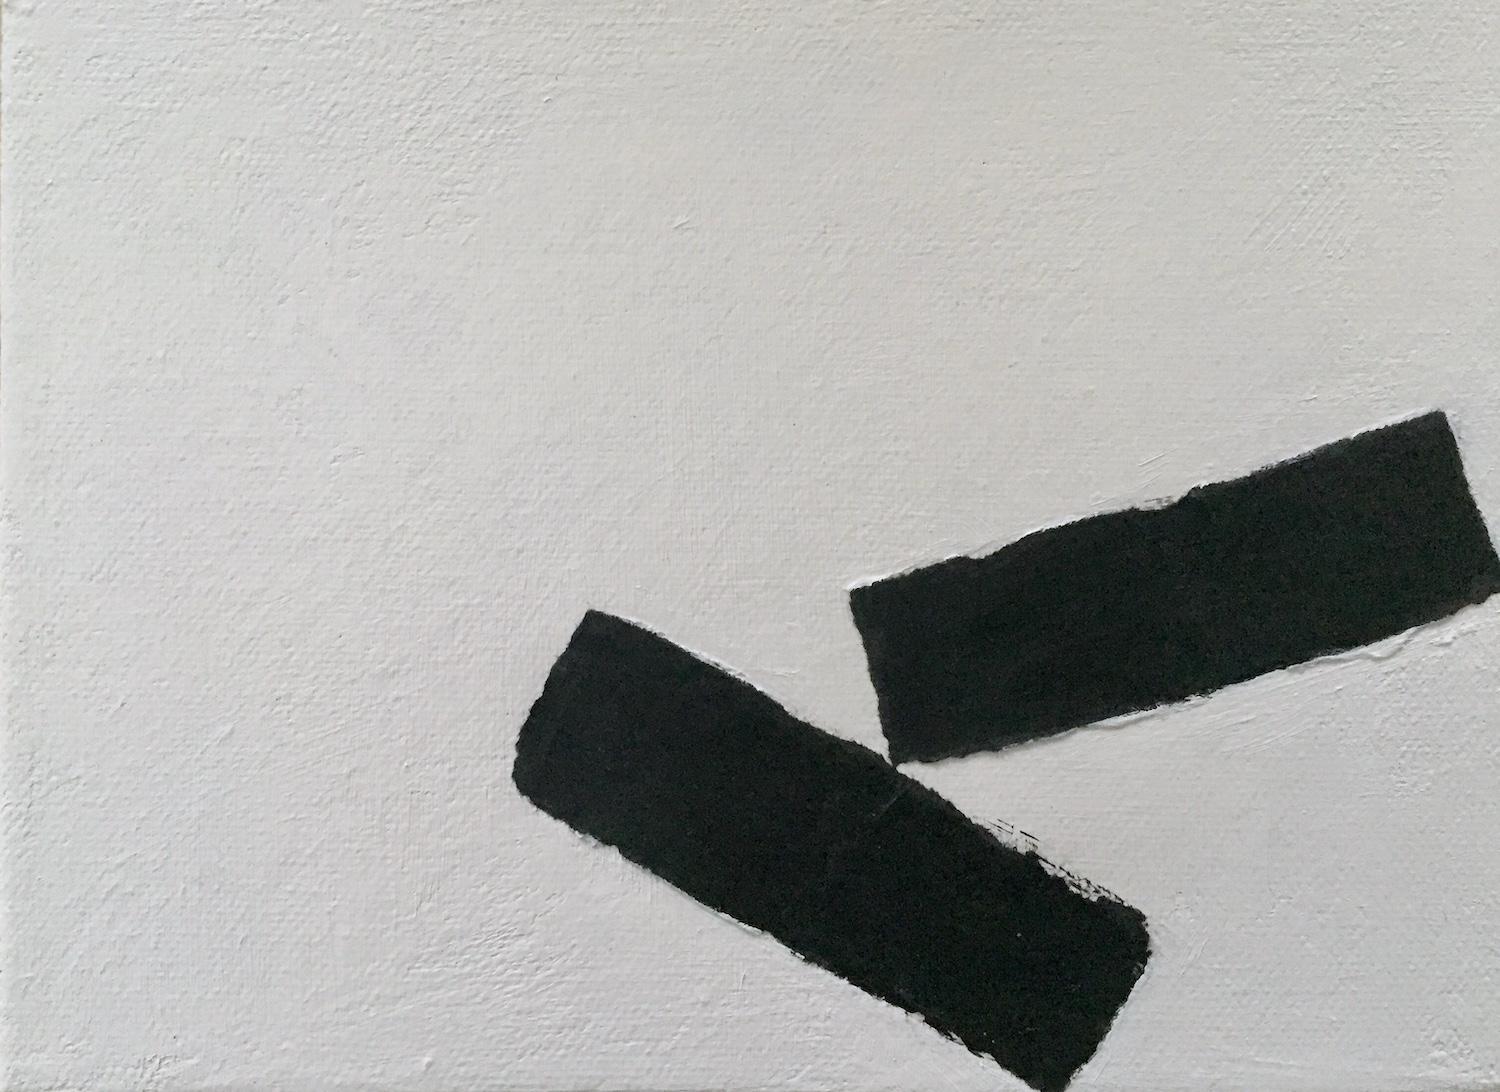 Small paintings are both intimate and impactful. This black and white abstract puts emphasis on simplified composition with the use of paint and paper collage. Small paintings can be moved around easily and are a great way to build up an art